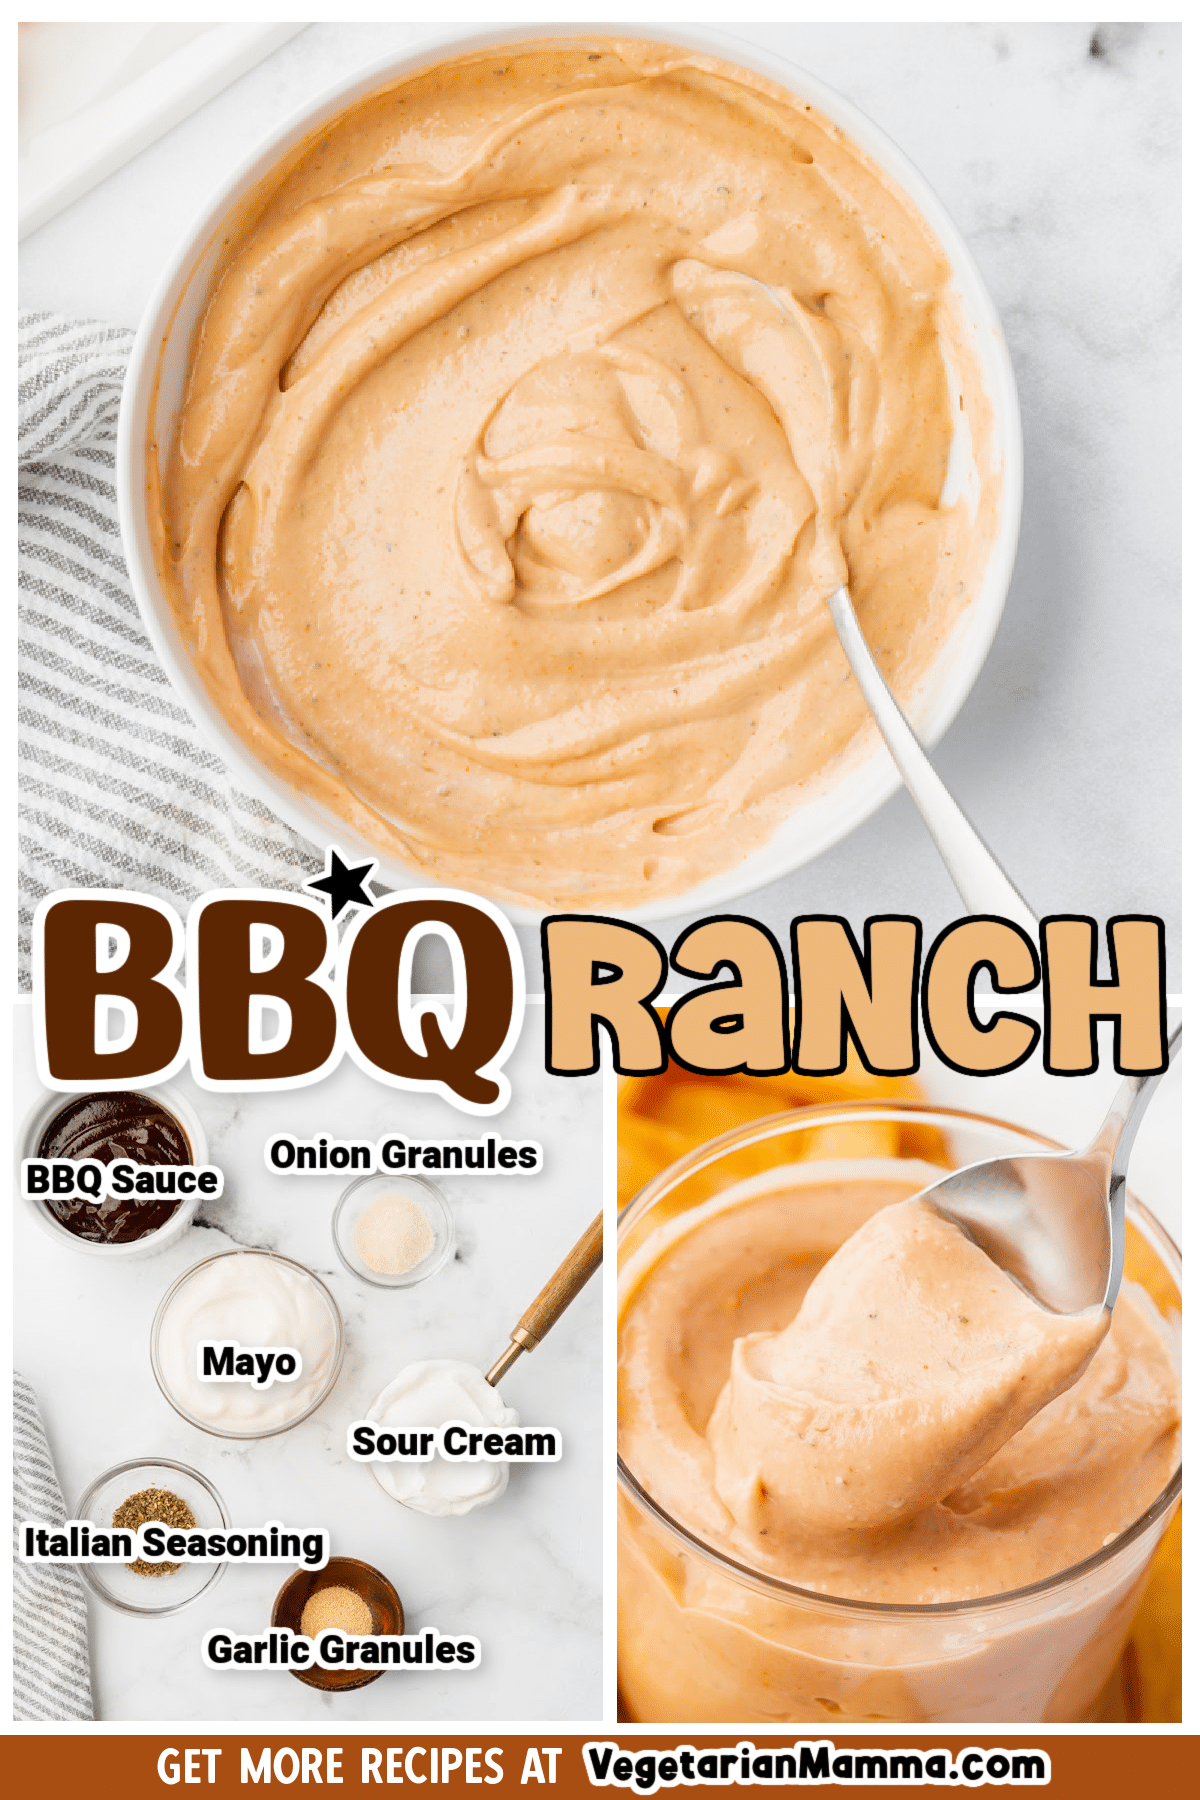 photos of bbq ranch dip with the ingredients listed.